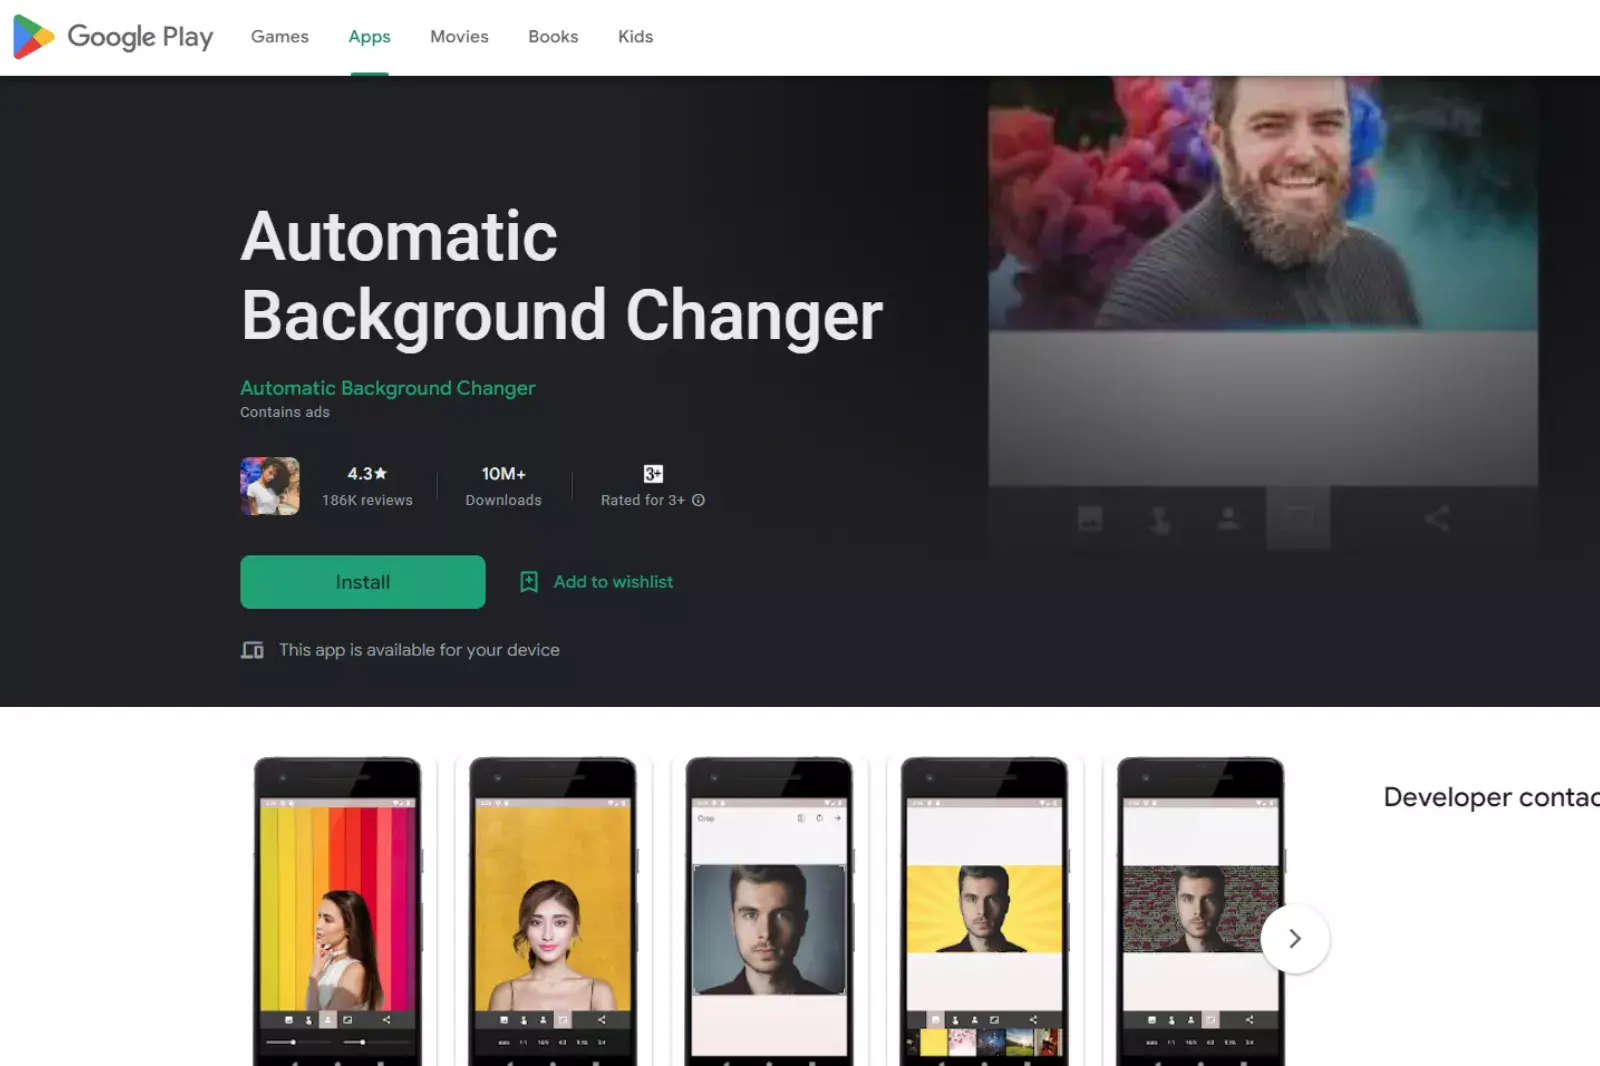 Automatic Background Changer